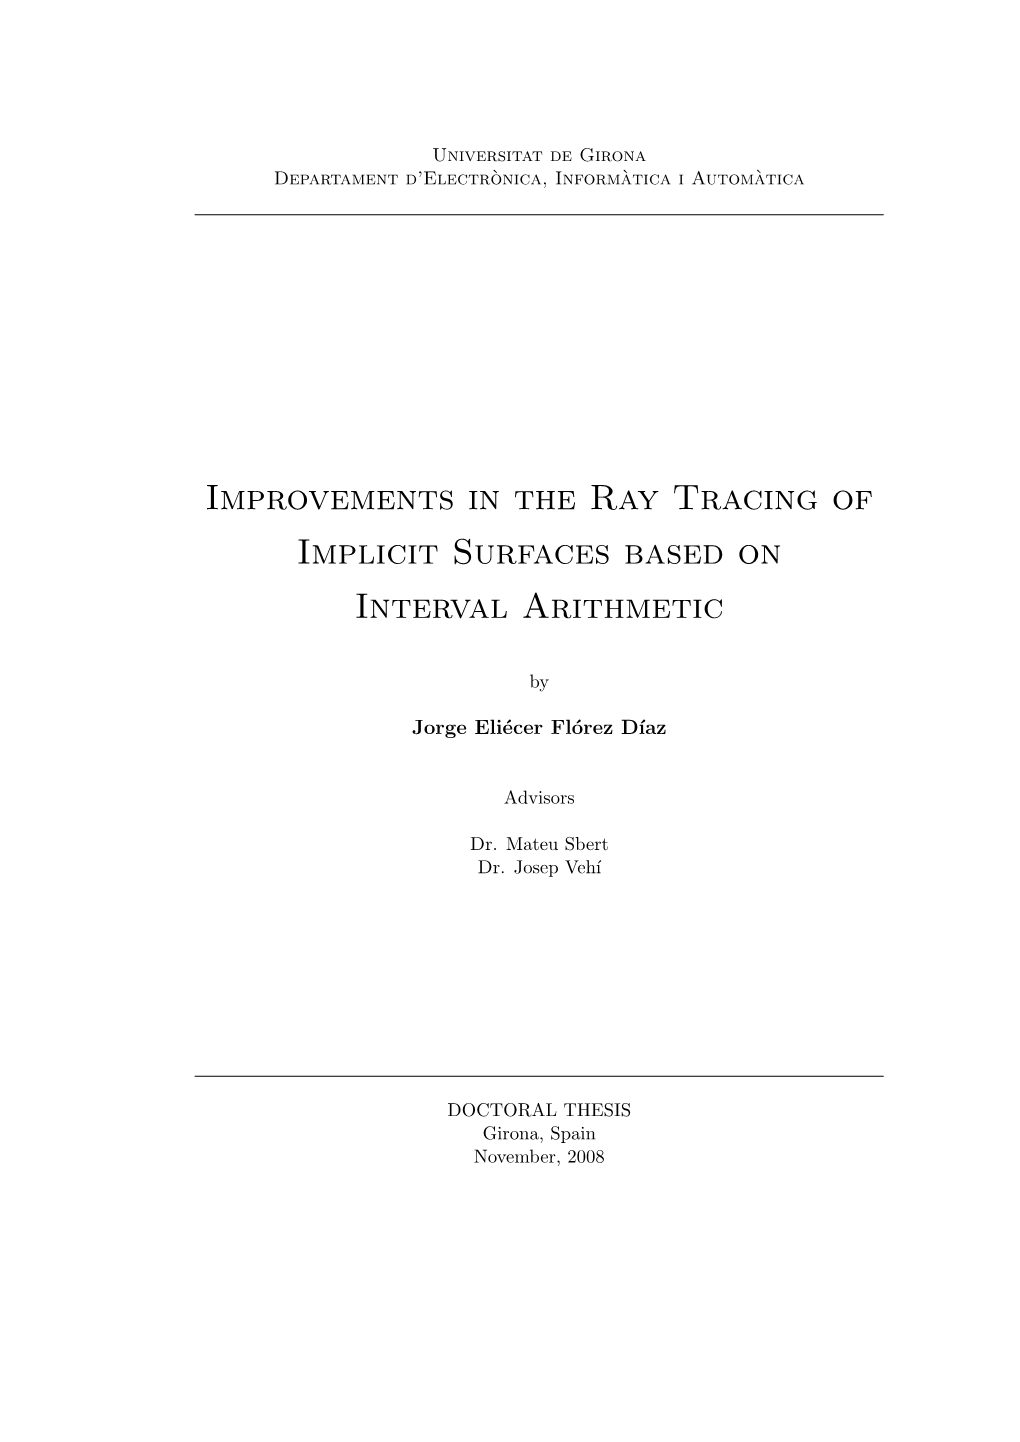 Improvements in the Ray Tracing of Implicit Surfaces Based on Interval Arithmetic